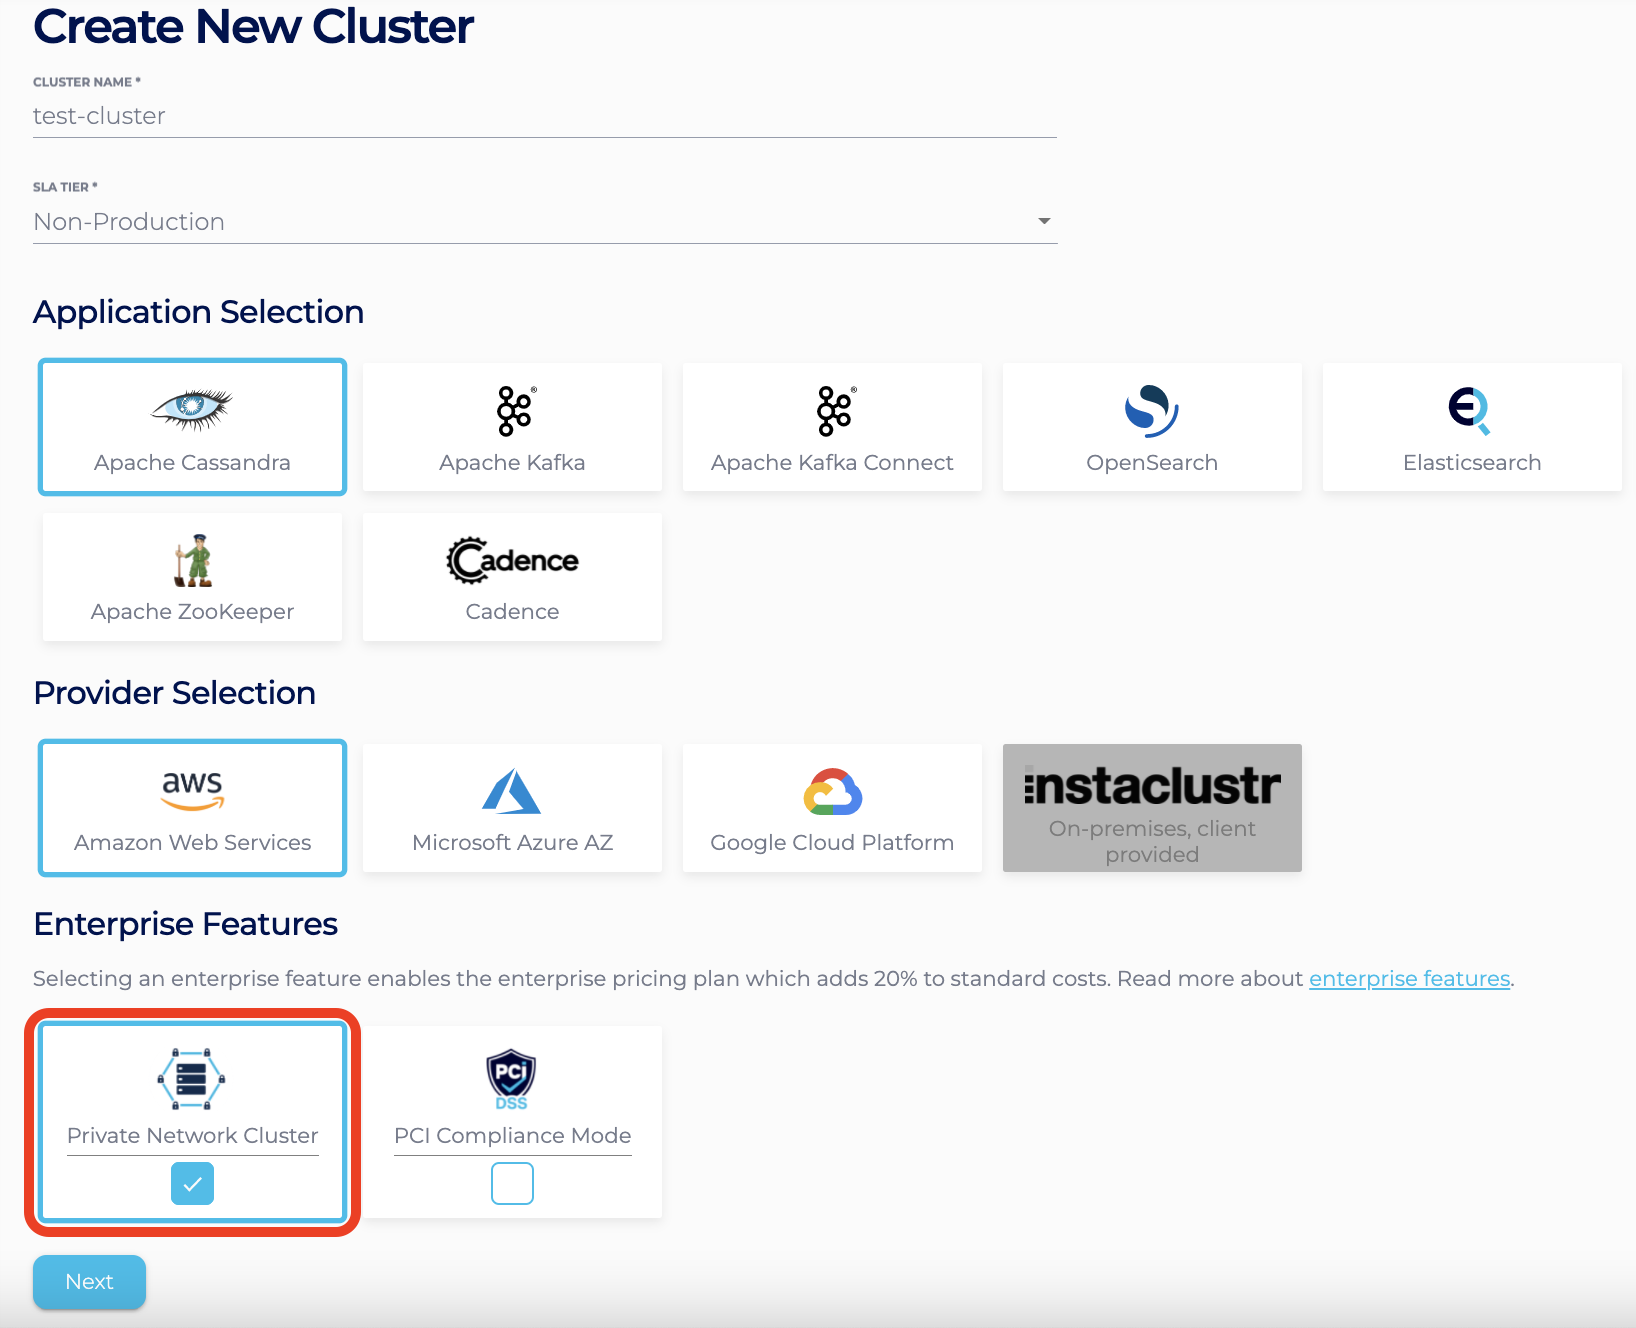 Tick the Private Network Cluster feature to include this option on your cluster.